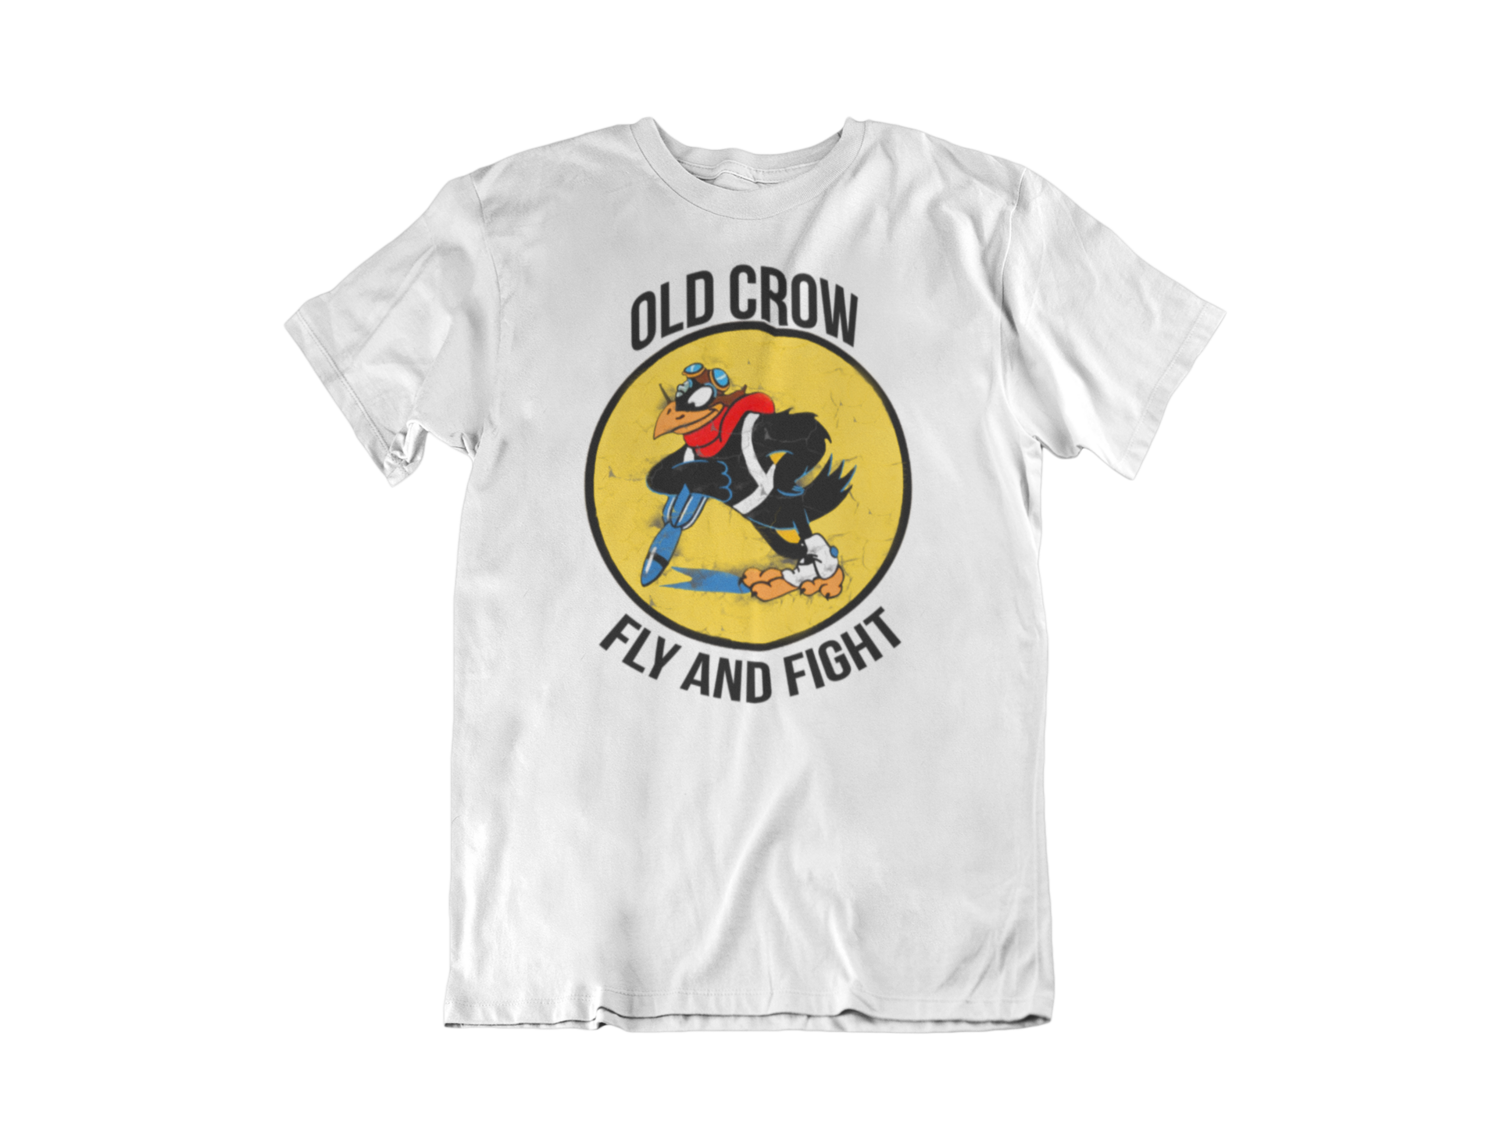 OLD CROW T-SHIRT FOR MEN